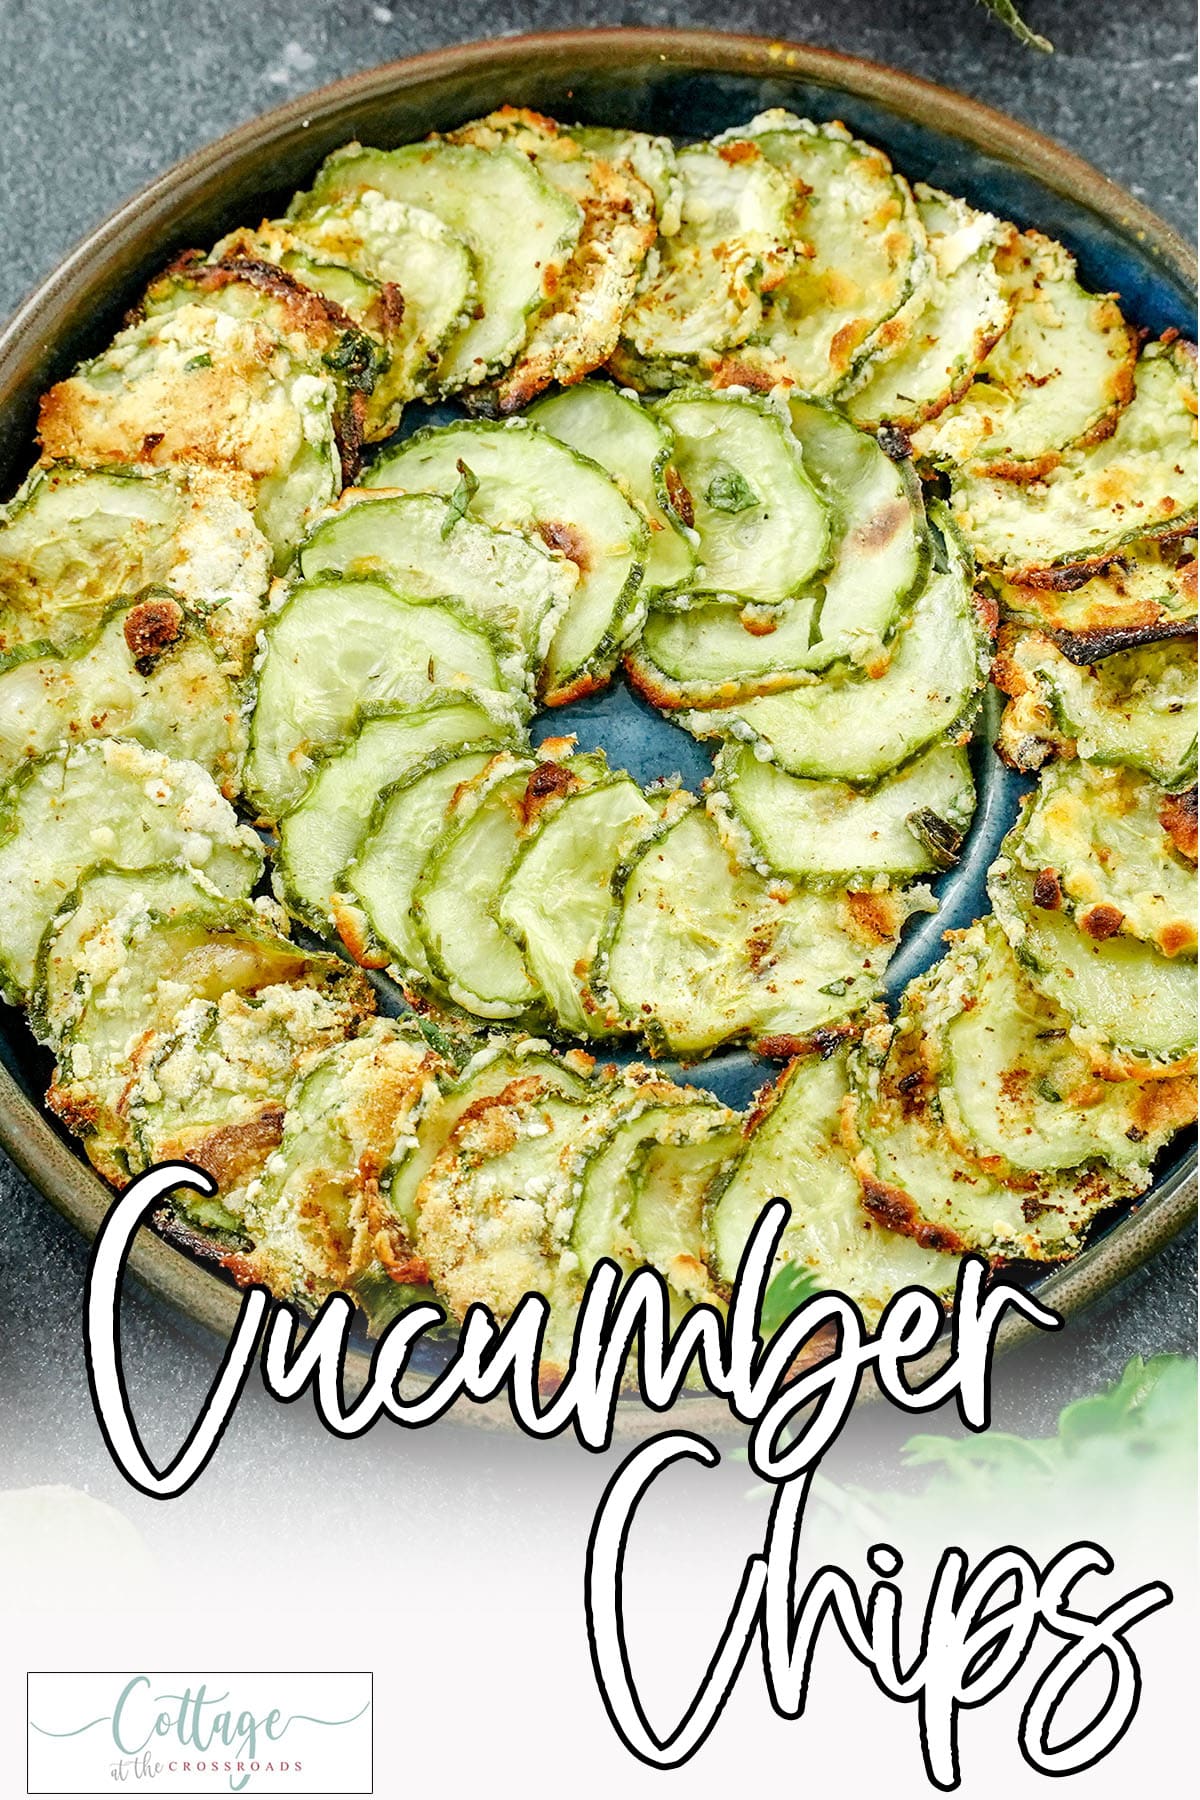 Overhead view of homemade cucumber chips with text which reads cucumber chips